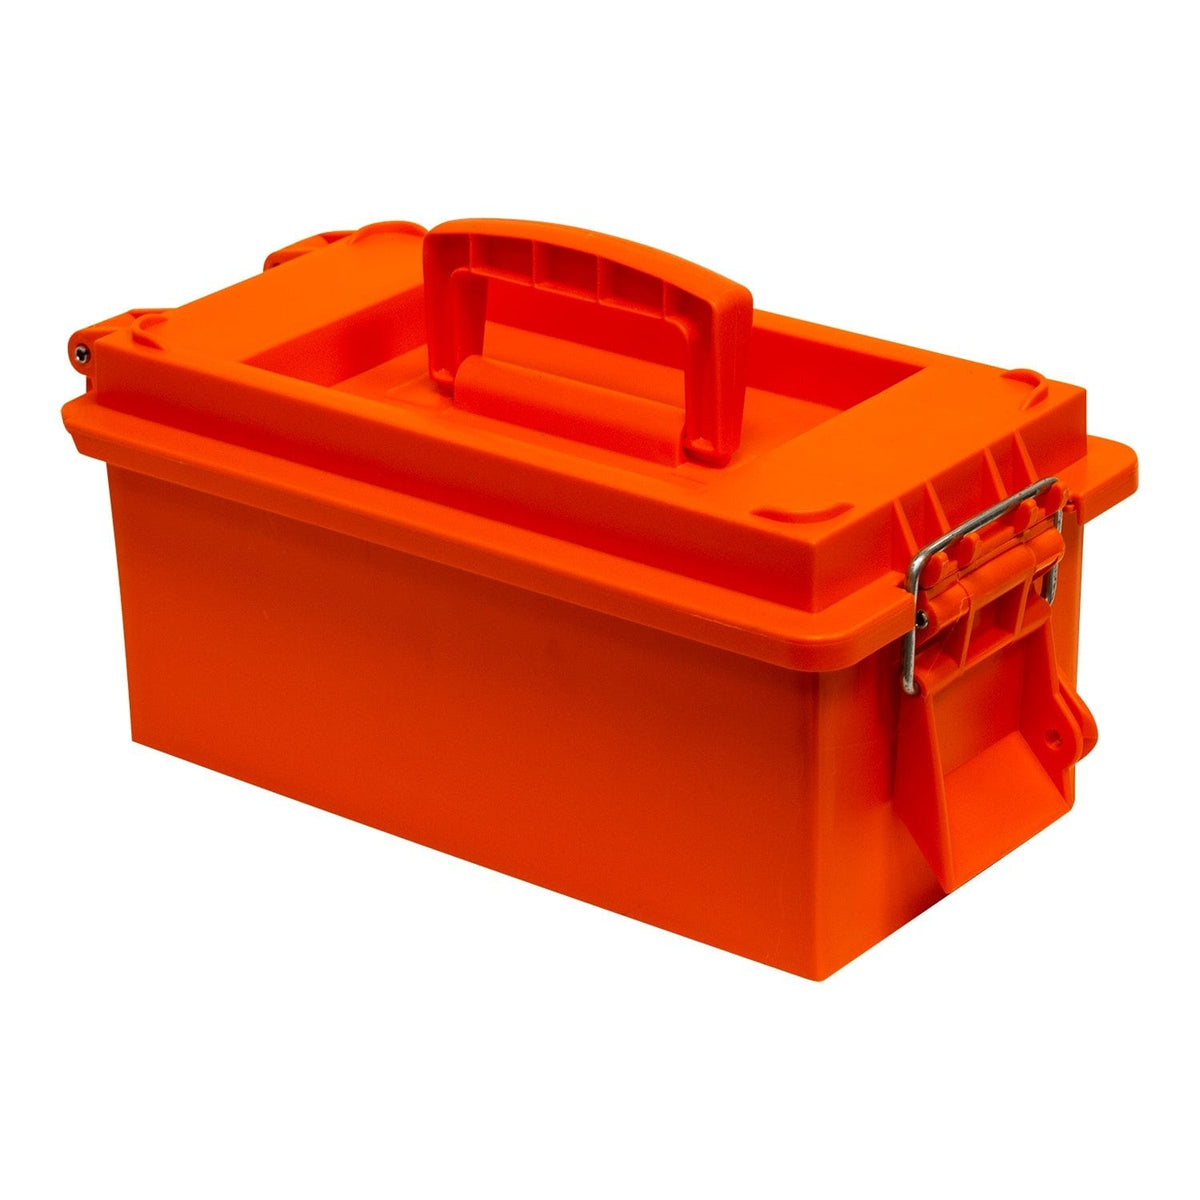 Wise Qualifies for Free Shipping Wise Small Utlity Dry Box Orange #56011-15